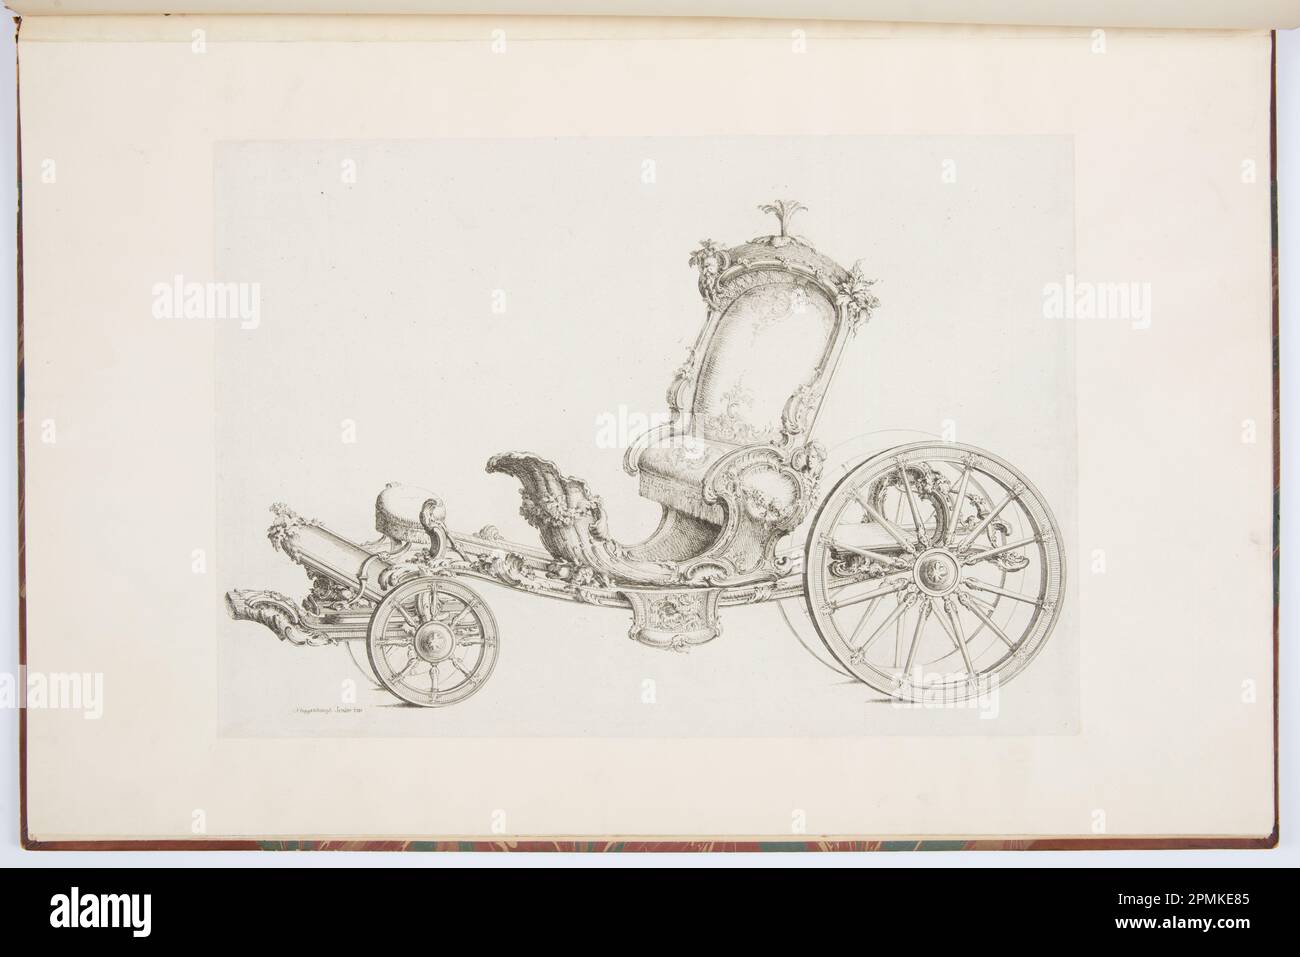 Bound Print, Design for a Cabriolet; Designed by Johann Michael Hoppenhaupt II (German, 1709–ca. 1778); France; etching on cream laid paper; 44 x 30.6 cm (17 5/16 x 12 1/16 in.) Overall: 1.5 x 44 x 65.4 cm (9/16 x 17 5/16 x 25 3/4 in.) Open: 17.7 x 65.2 x 82 cm (6 15/16 x 25 11/16 x 32 5/16 in.) Stock Photo